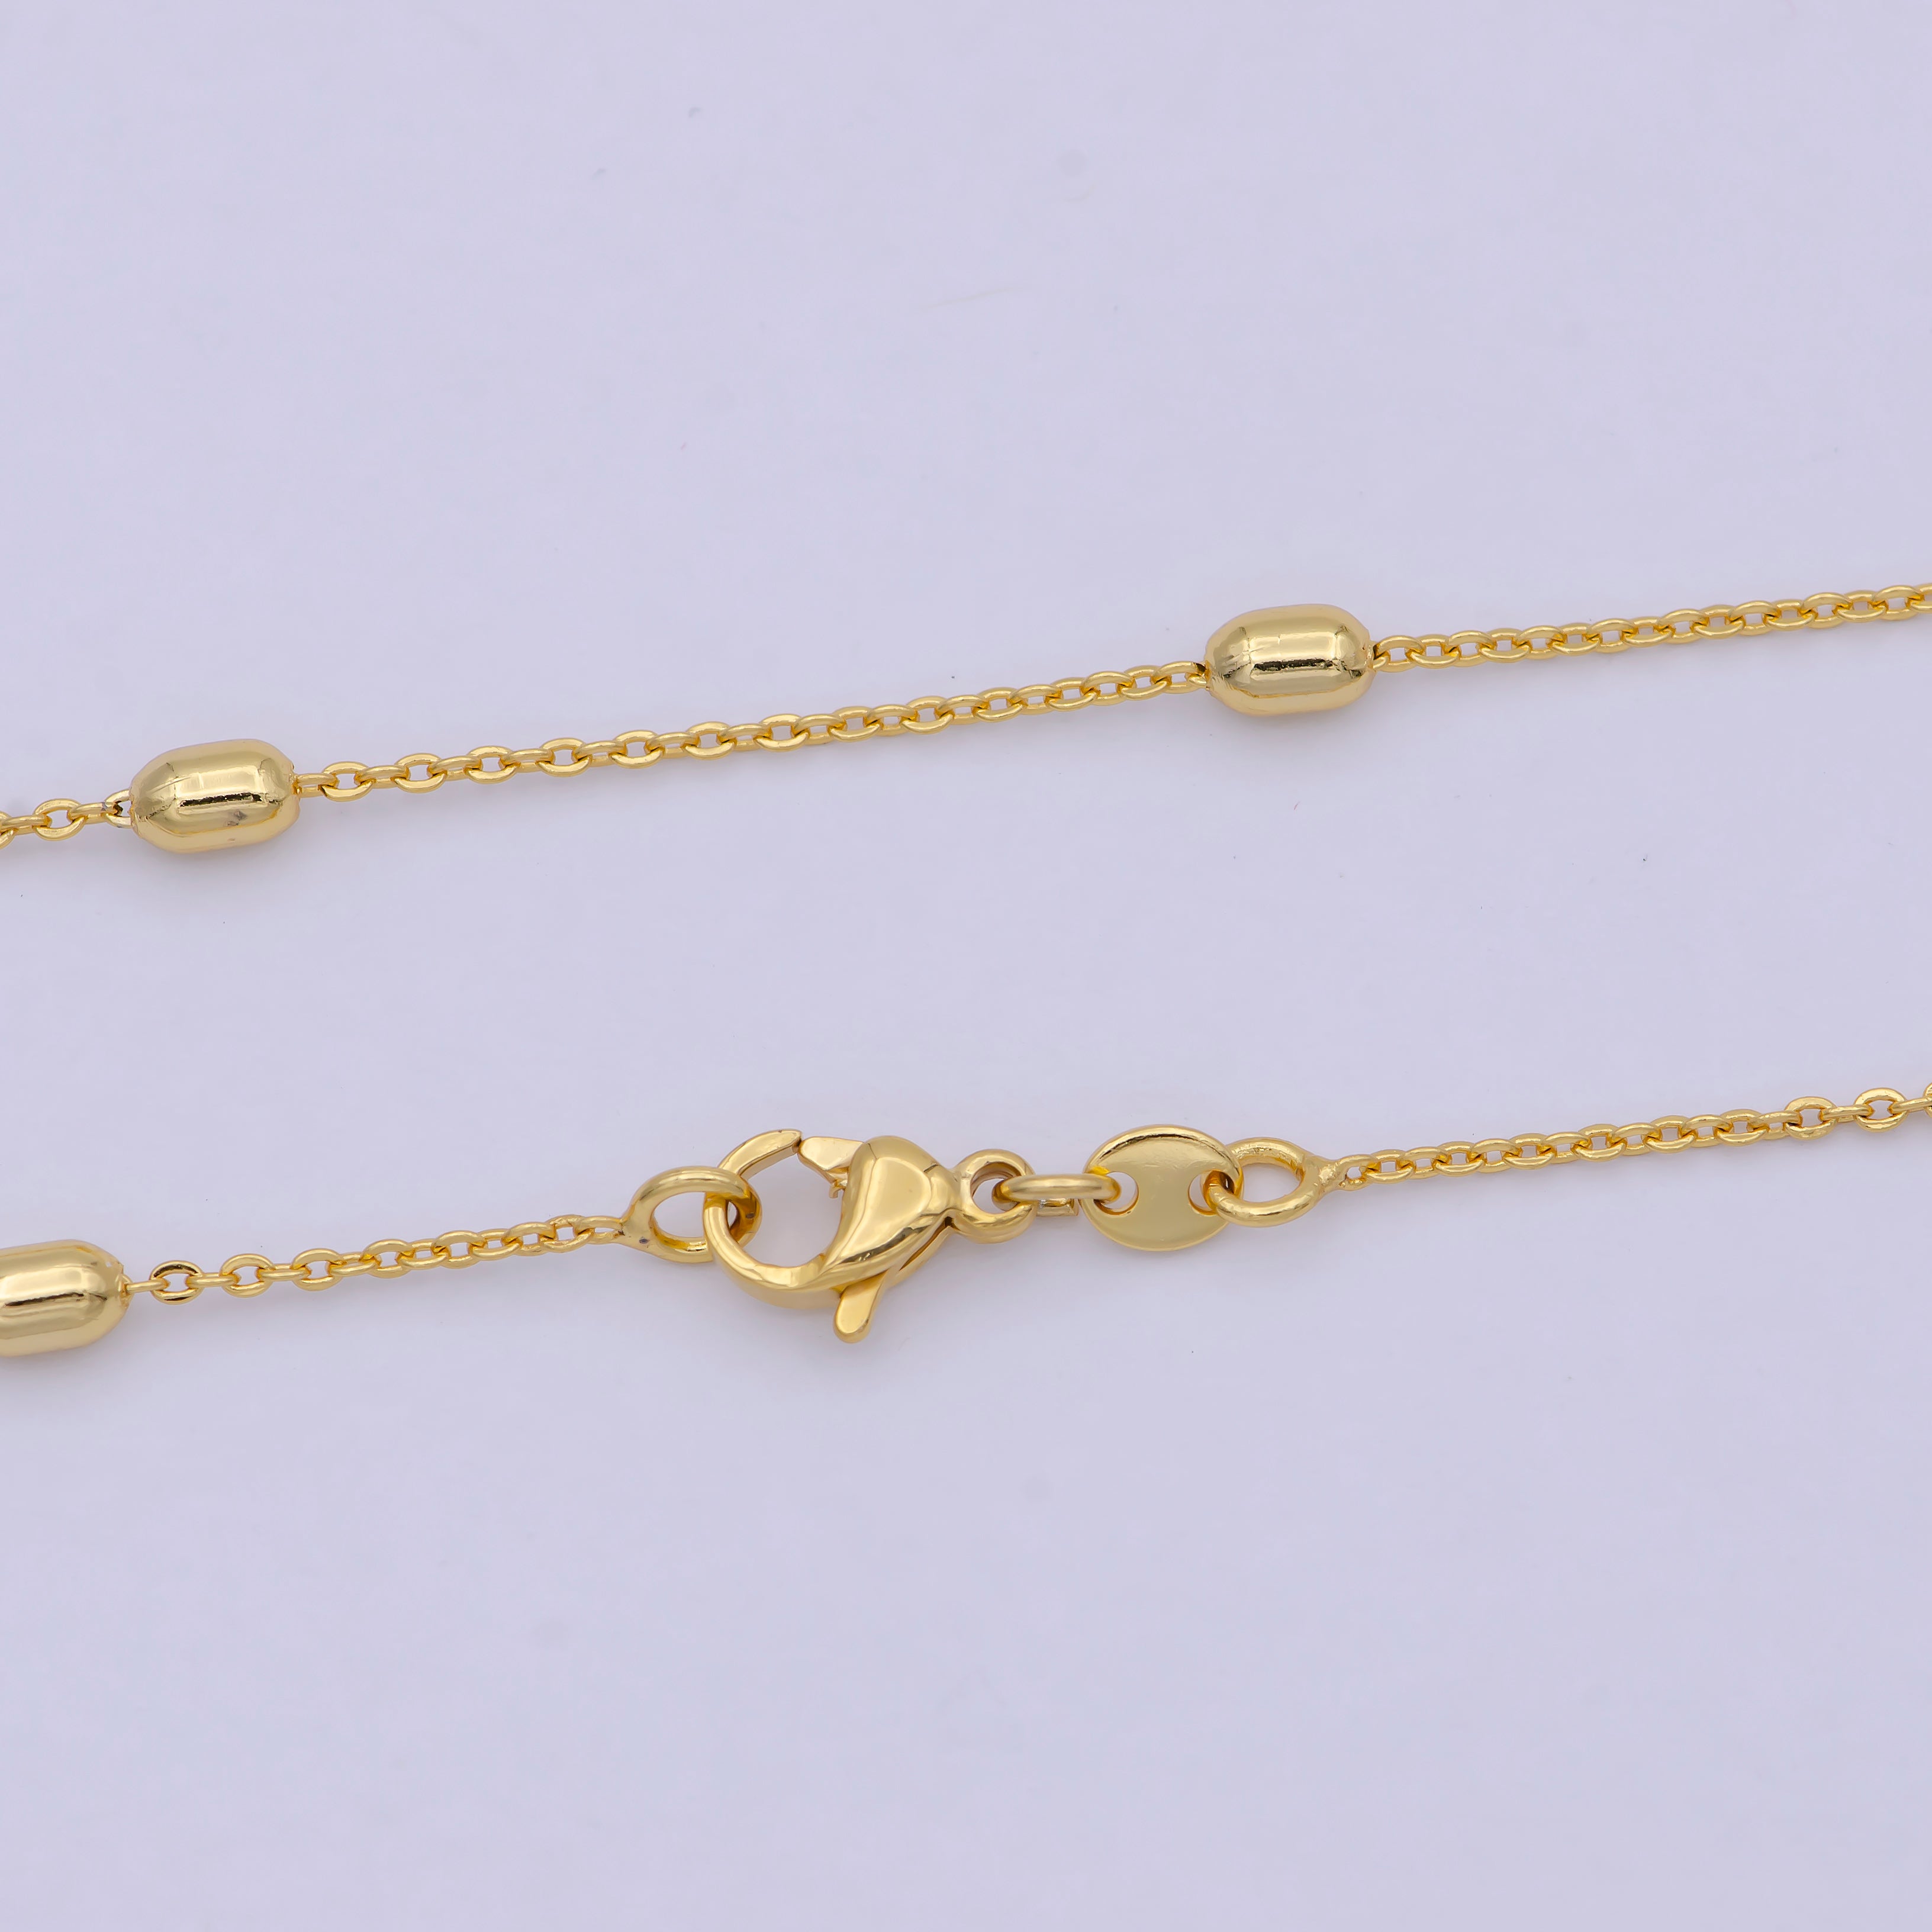 1 mm Satellite necklace, 24k gold filled chain Bead, Dainty gold filled chain, minimalist necklace 17.7 inch chain WA-741 - DLUXCA